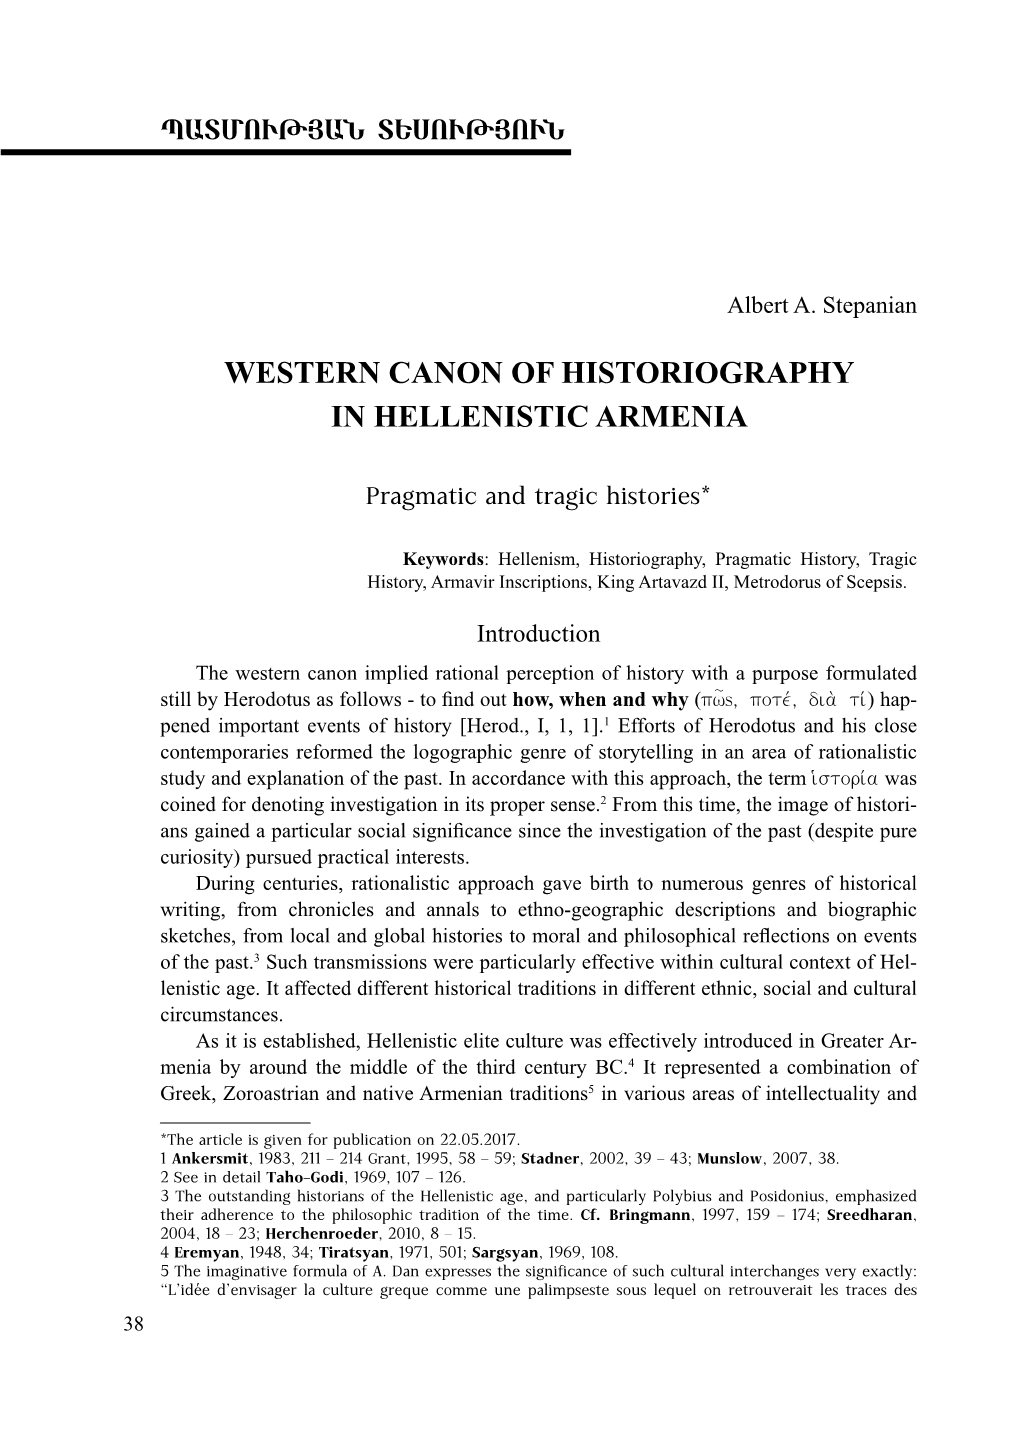 Western Canon of Historiography in Hellenistic Armenia